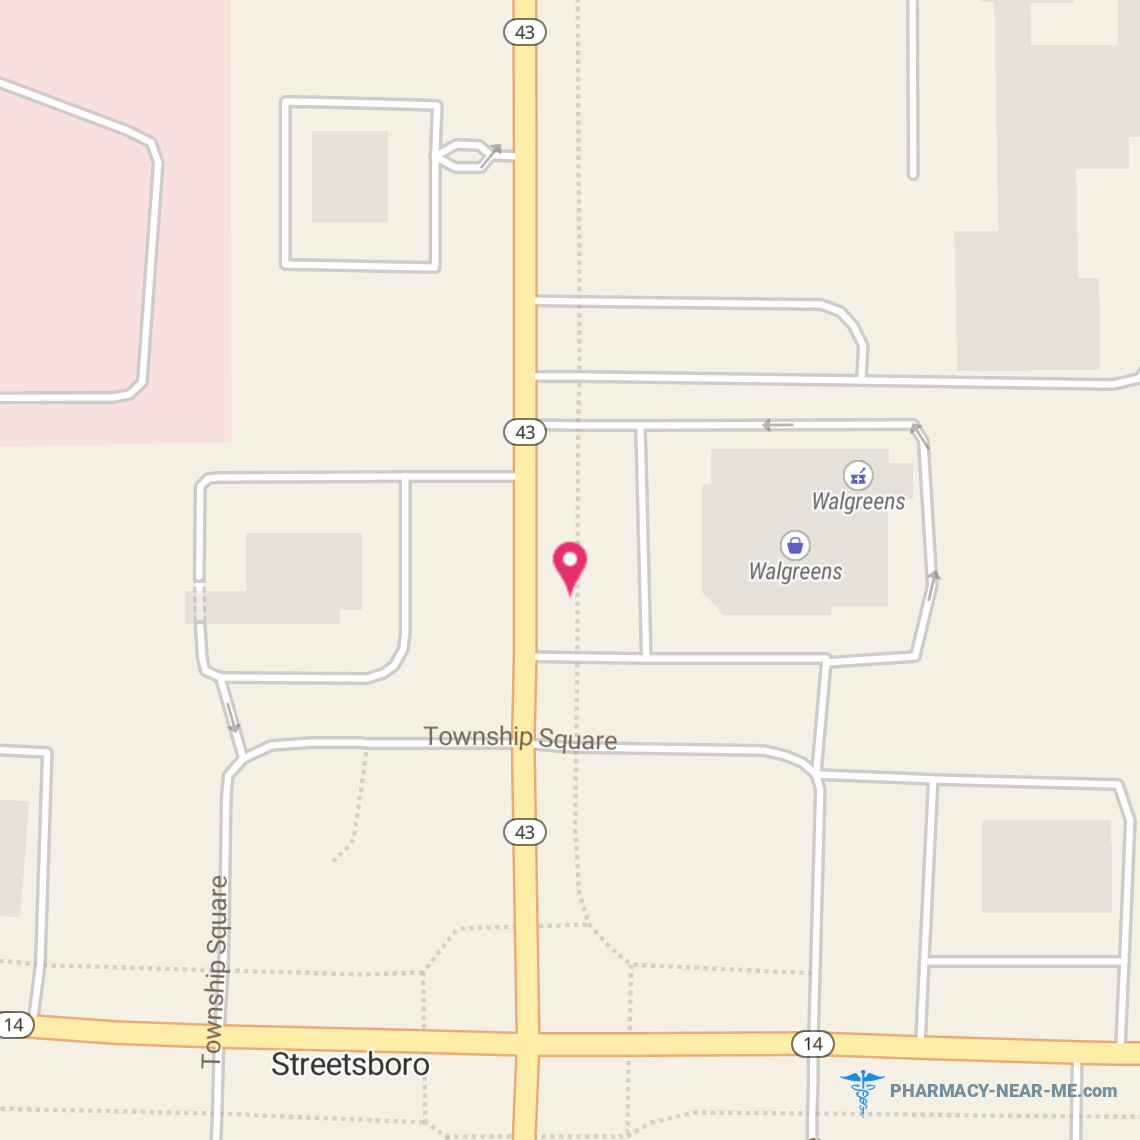 WALGREENS #09346 - Pharmacy Hours, Phone, Reviews & Information: 9166 State Route 43, Streetsboro, Ohio 44241, United States